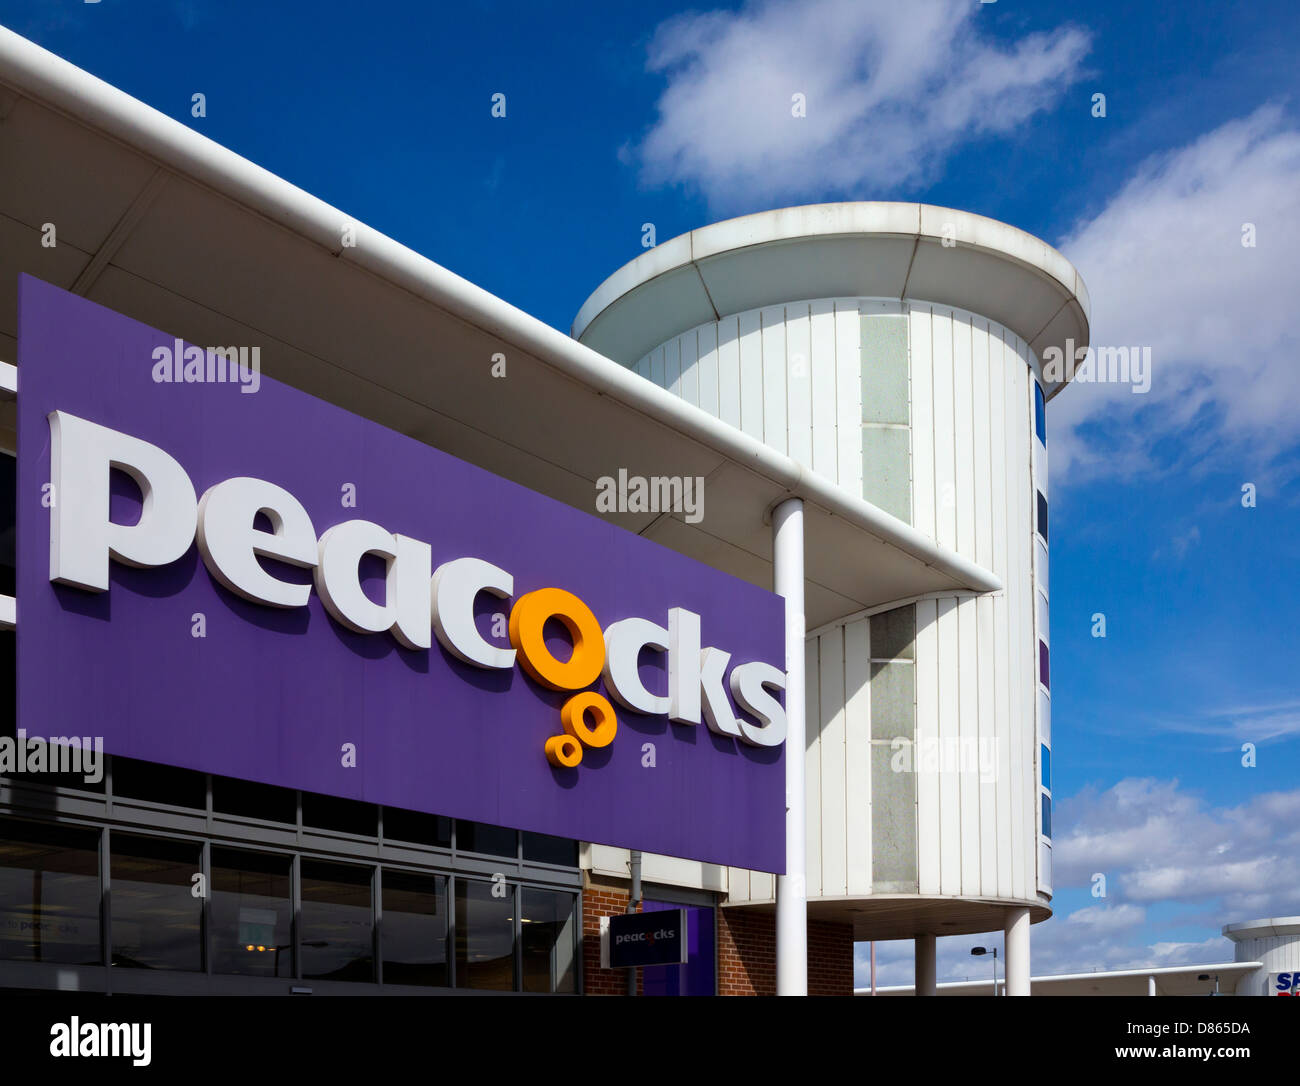 Branch of Peacocks budget fashion retailer in a large shopping centre in Mansfield Nottinghamshire England UK Stock Photo